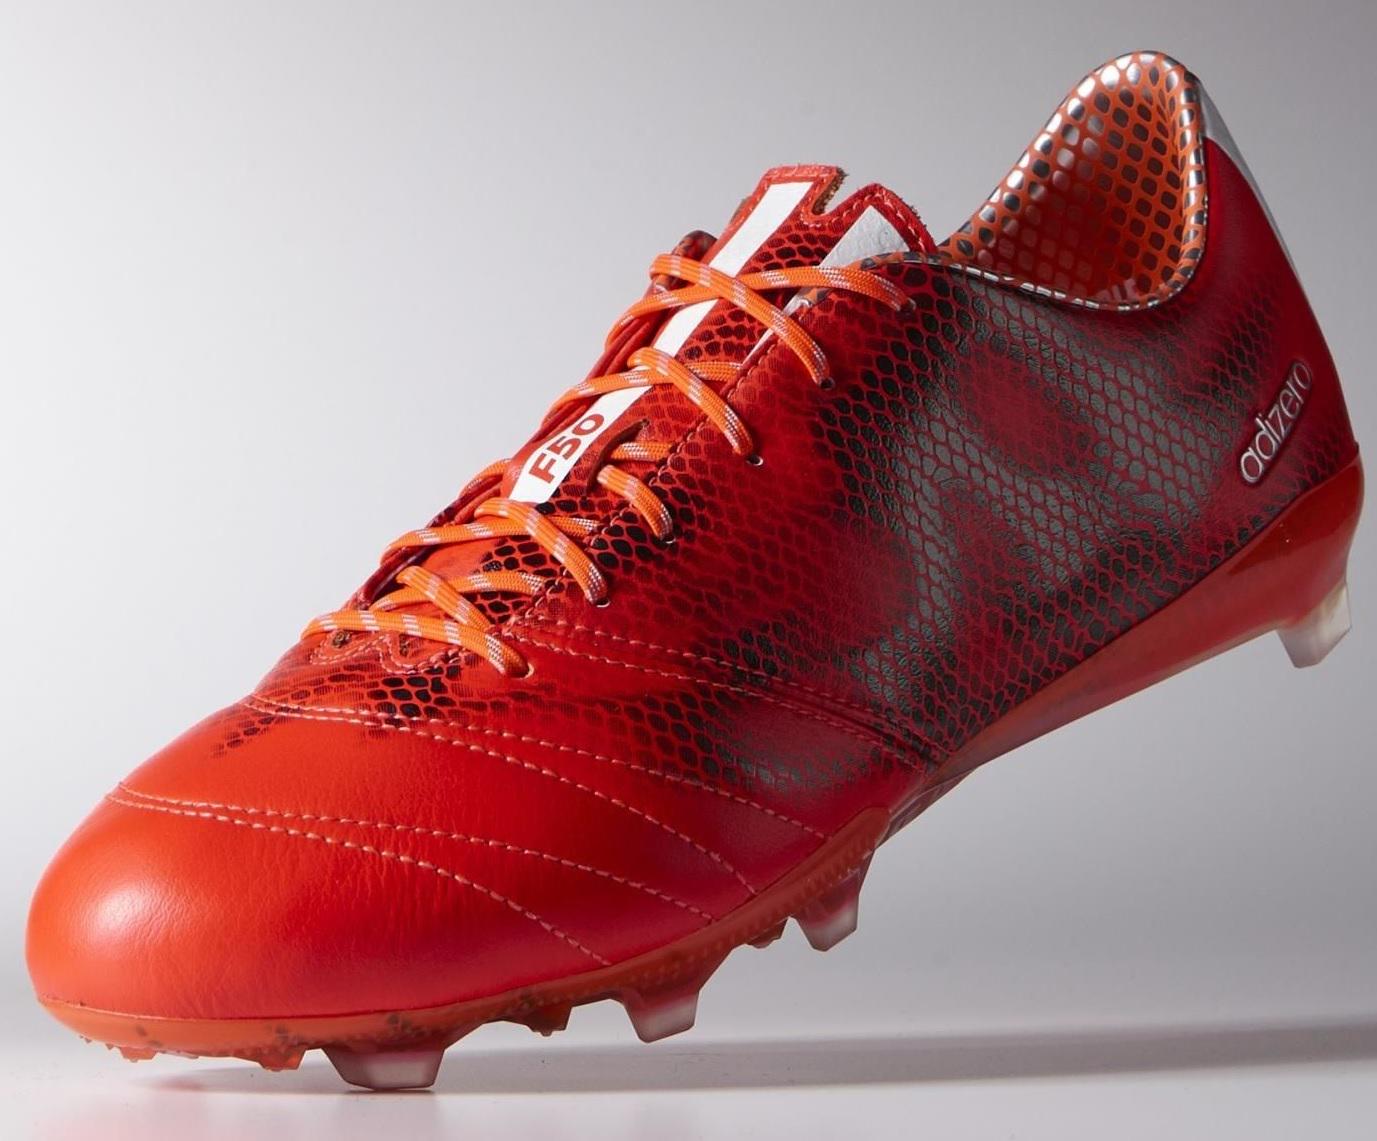 voetbalshirts Twitter: "OFFICIAL !! #F50 #Adizero solar red #boots 2015 http://t.co/dHpgAcDCCY #footballboots #Suarez #Bale / Twitter